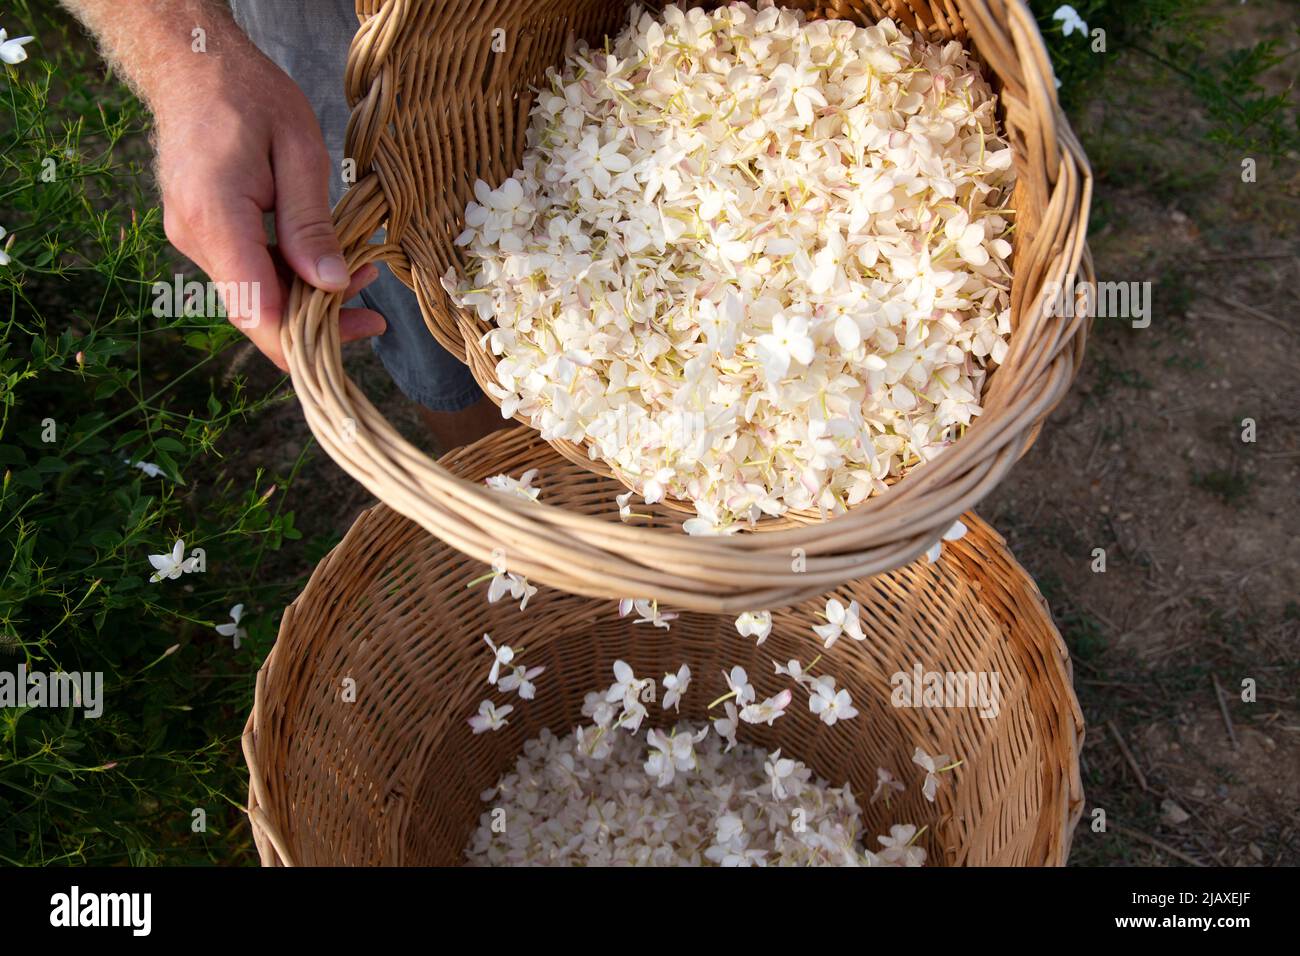 Pierre Chiarla, 29, perfume flower grower picks jasmine flowers in his field in Grasse, France on September 10, 2021. It takes between 7,000 and 10,000 jasmine flowers to make up 1 kilogram (2.2 pounds). And it takes about a ton of flowers to extract a kilo of jasmine absolute. Each kilo is worth over 50,000 euros, about $59,000. Chiarla says “jasmine is so delicate that it still must be picked by hand.” He says climate change is a concern. 'We are worried because we are seeing, for example, freezing temperatures and hail in the spring much more frequently,' says Chiarla. Grasse has had a pros Stock Photo